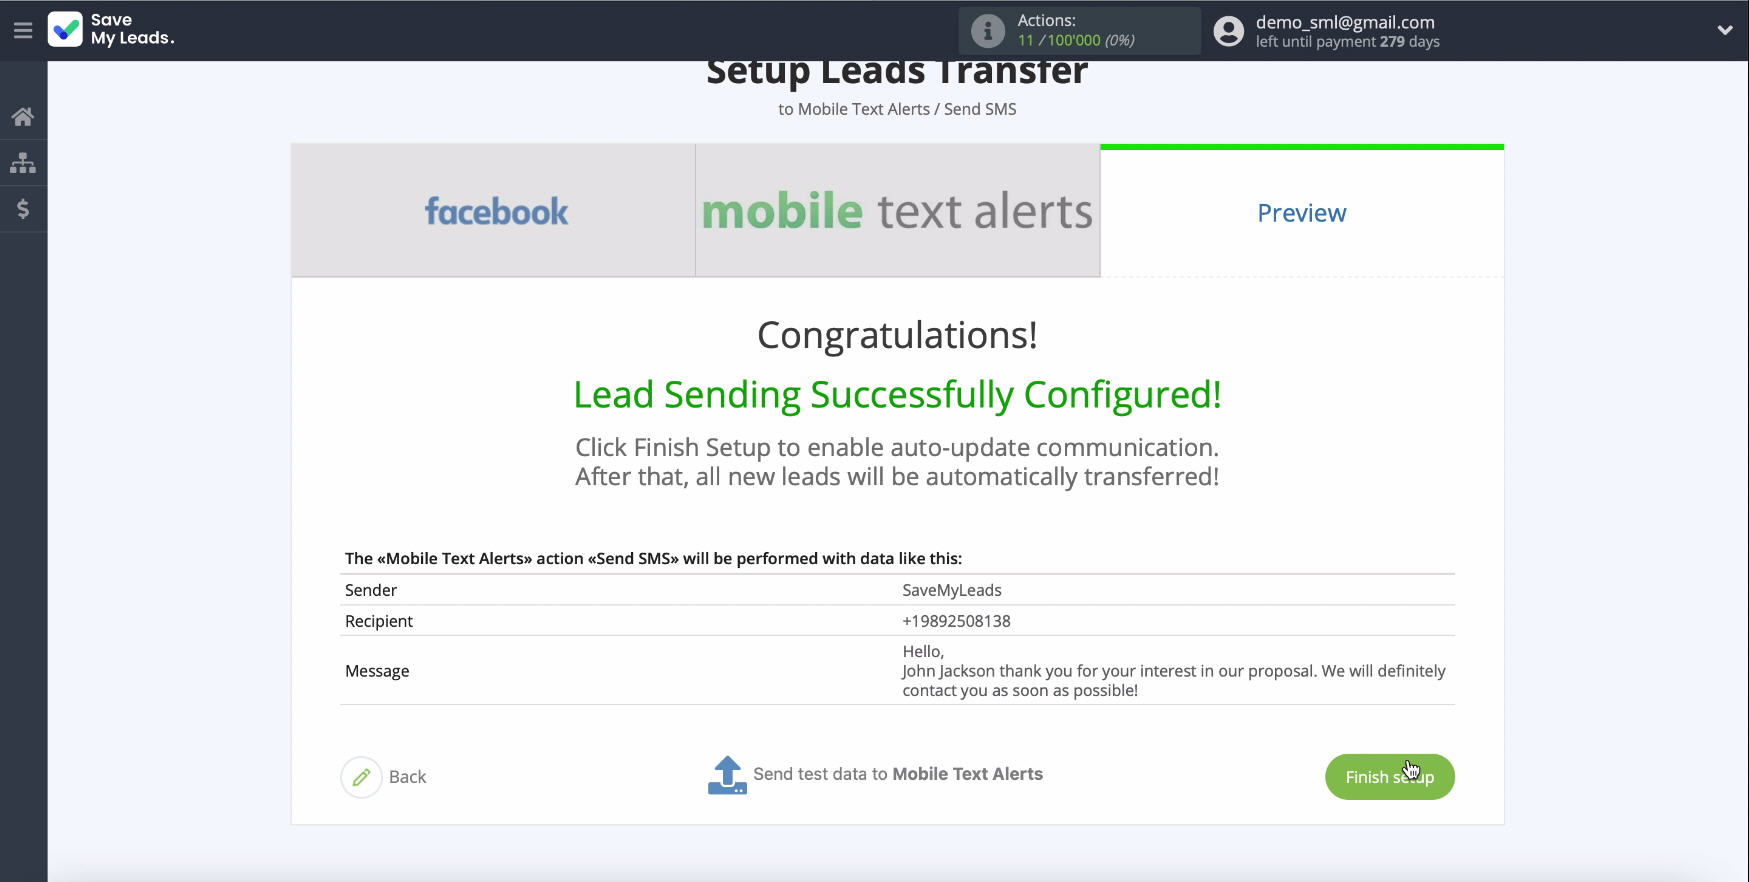 Facebook and Mobile Text Alerts integration | Completing the setup